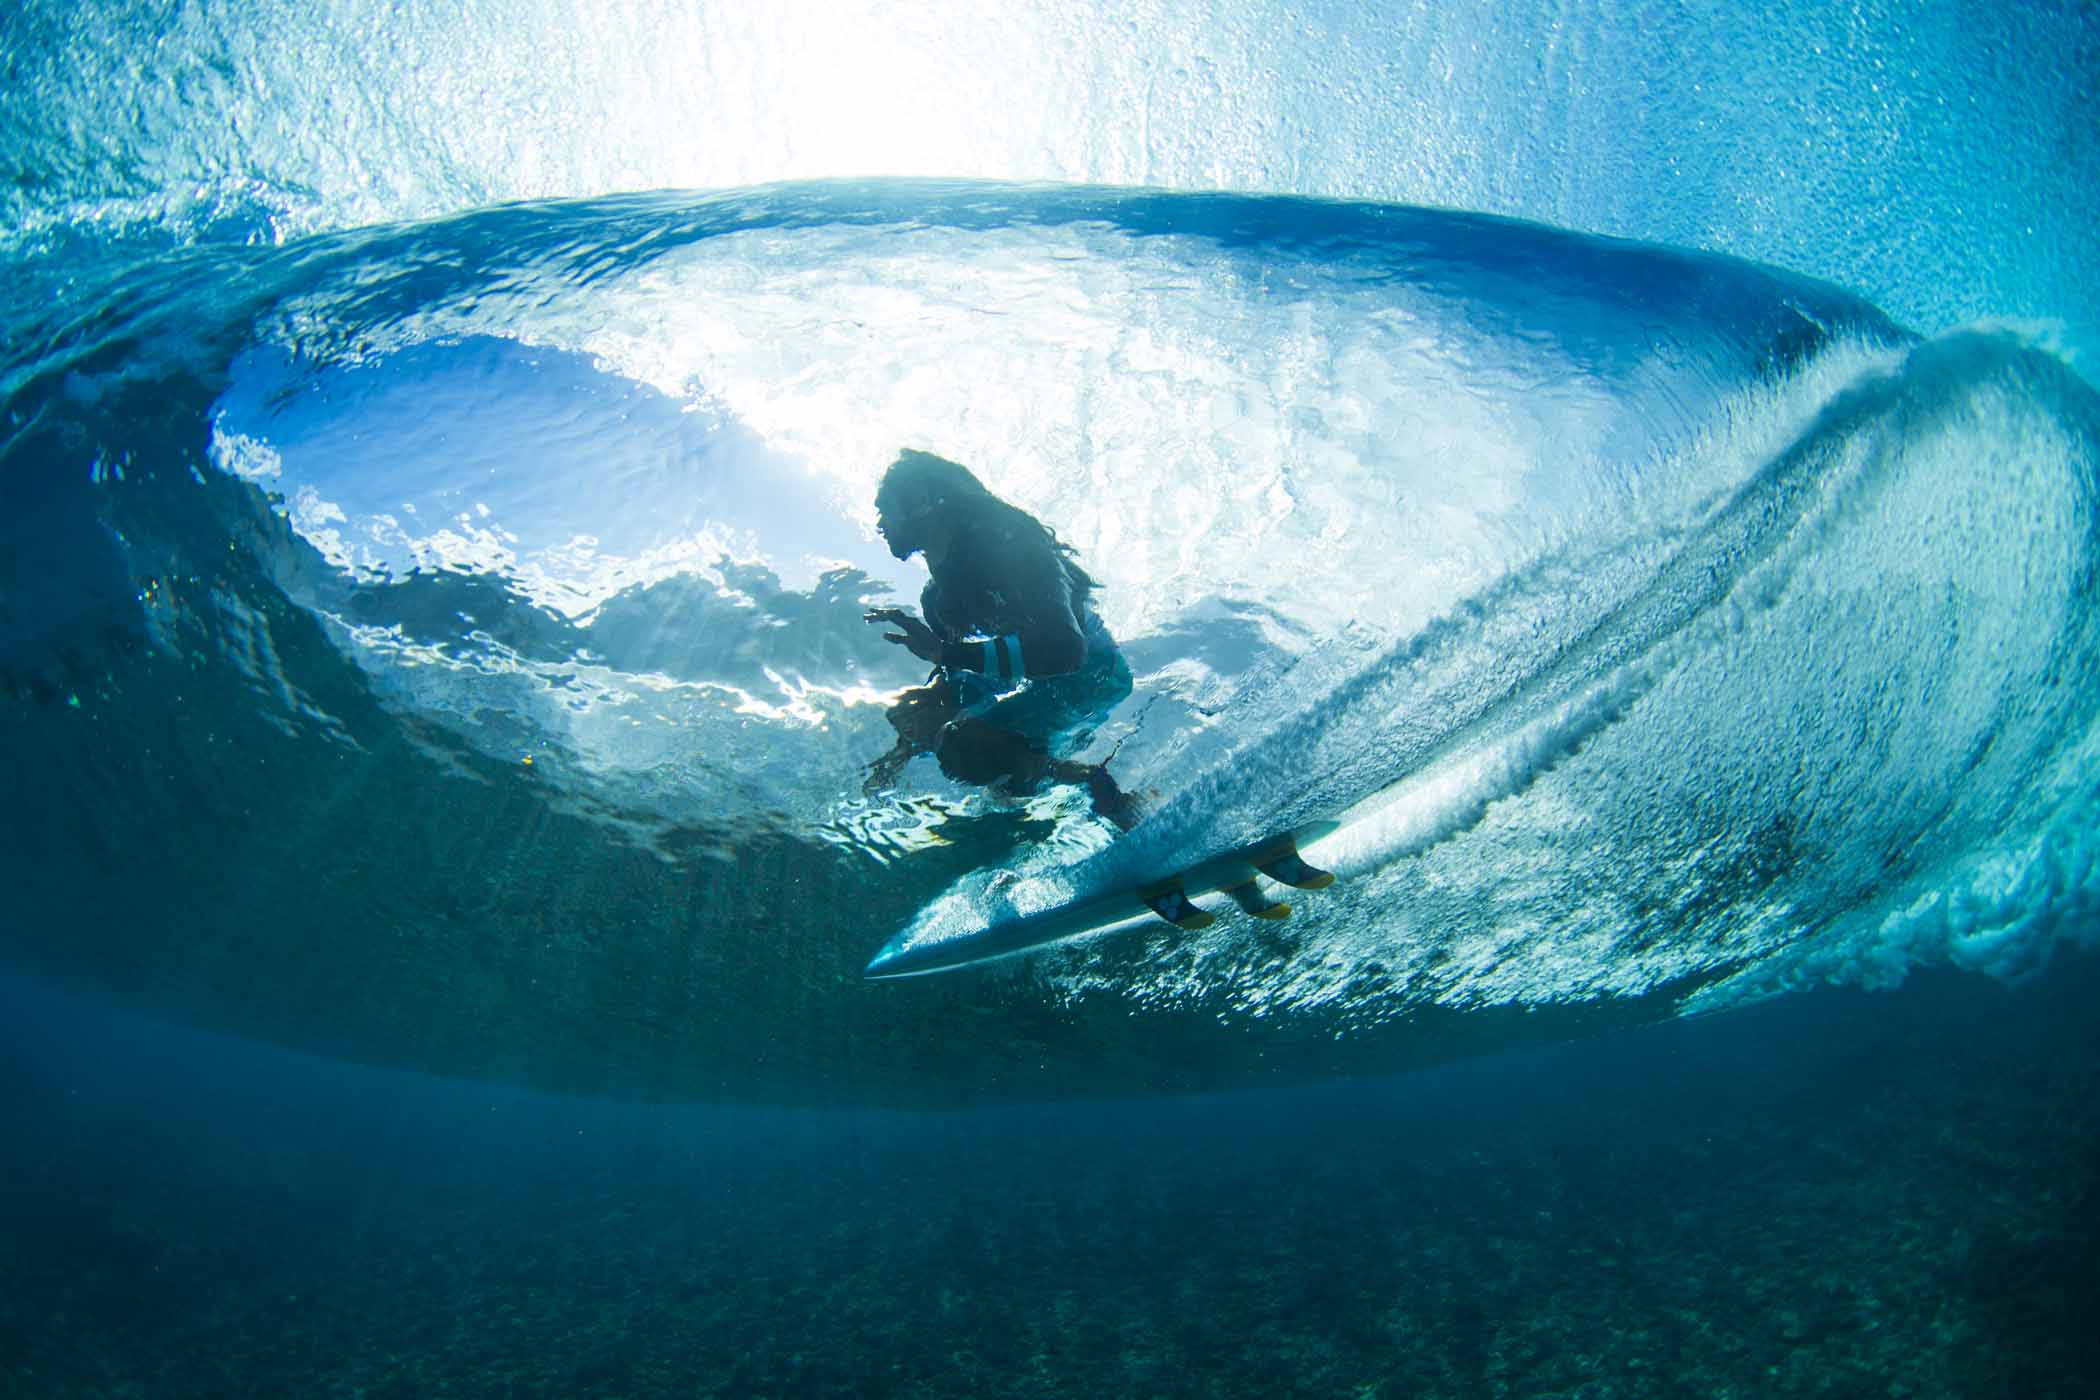 Rob Machado on a 5’5 on a windless crystal clear day at Teahupoo in Tahiti.  This image was part of a story that Rob and Ryan Burch did for SURFER Magazine. Photo: Glaser.